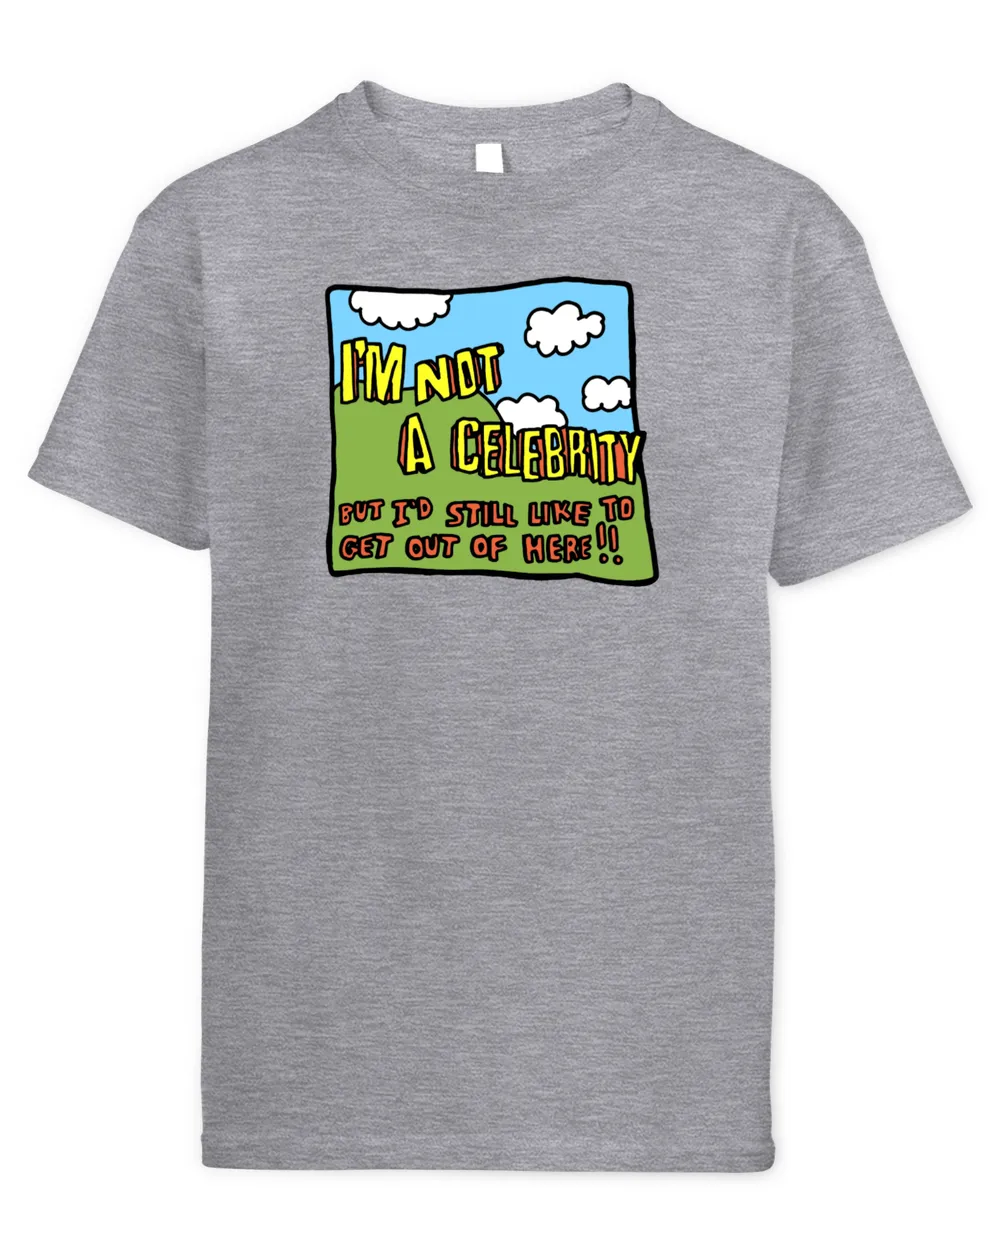 I'm Not A Celebrity But I'd Still Like To Get Out Of Here T Shirt Kids Standard T-Shirt sport-grey 